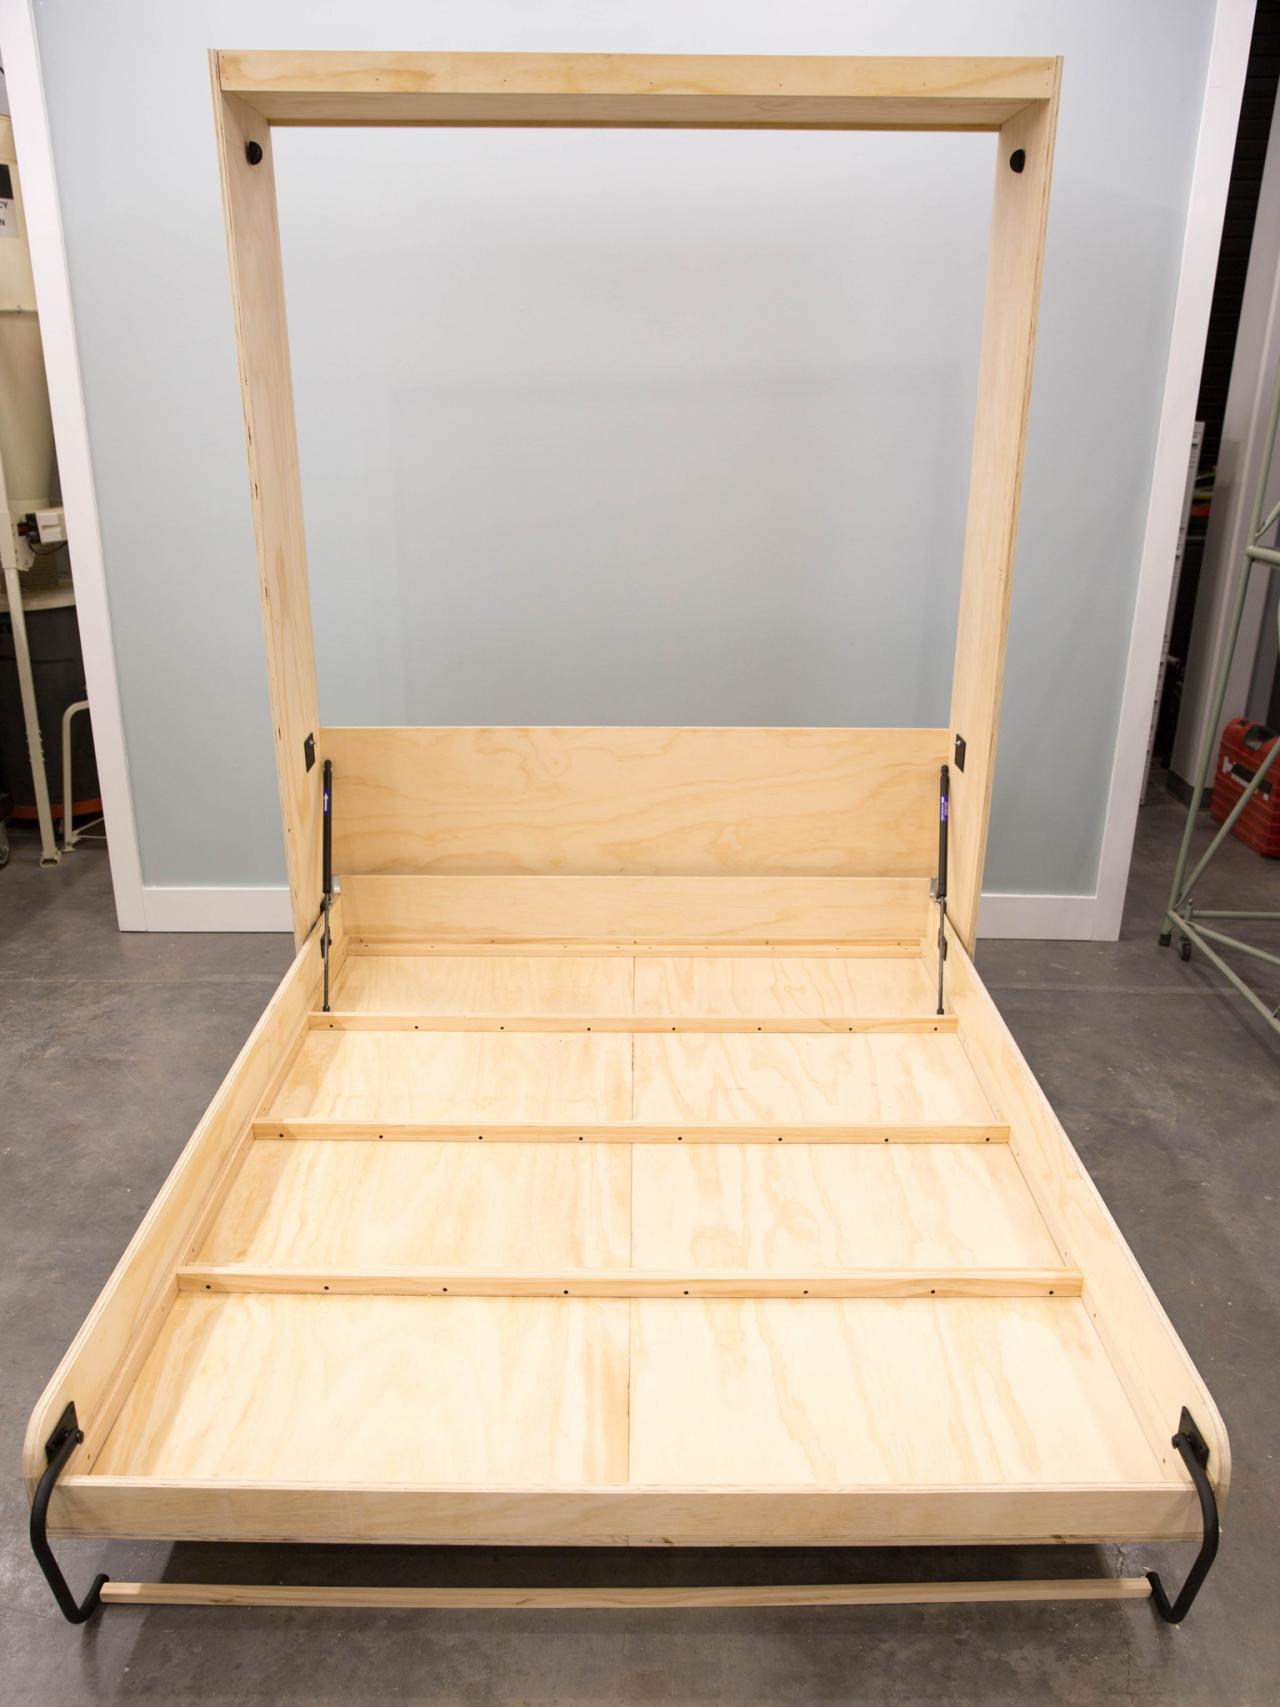 How to build a wall bed